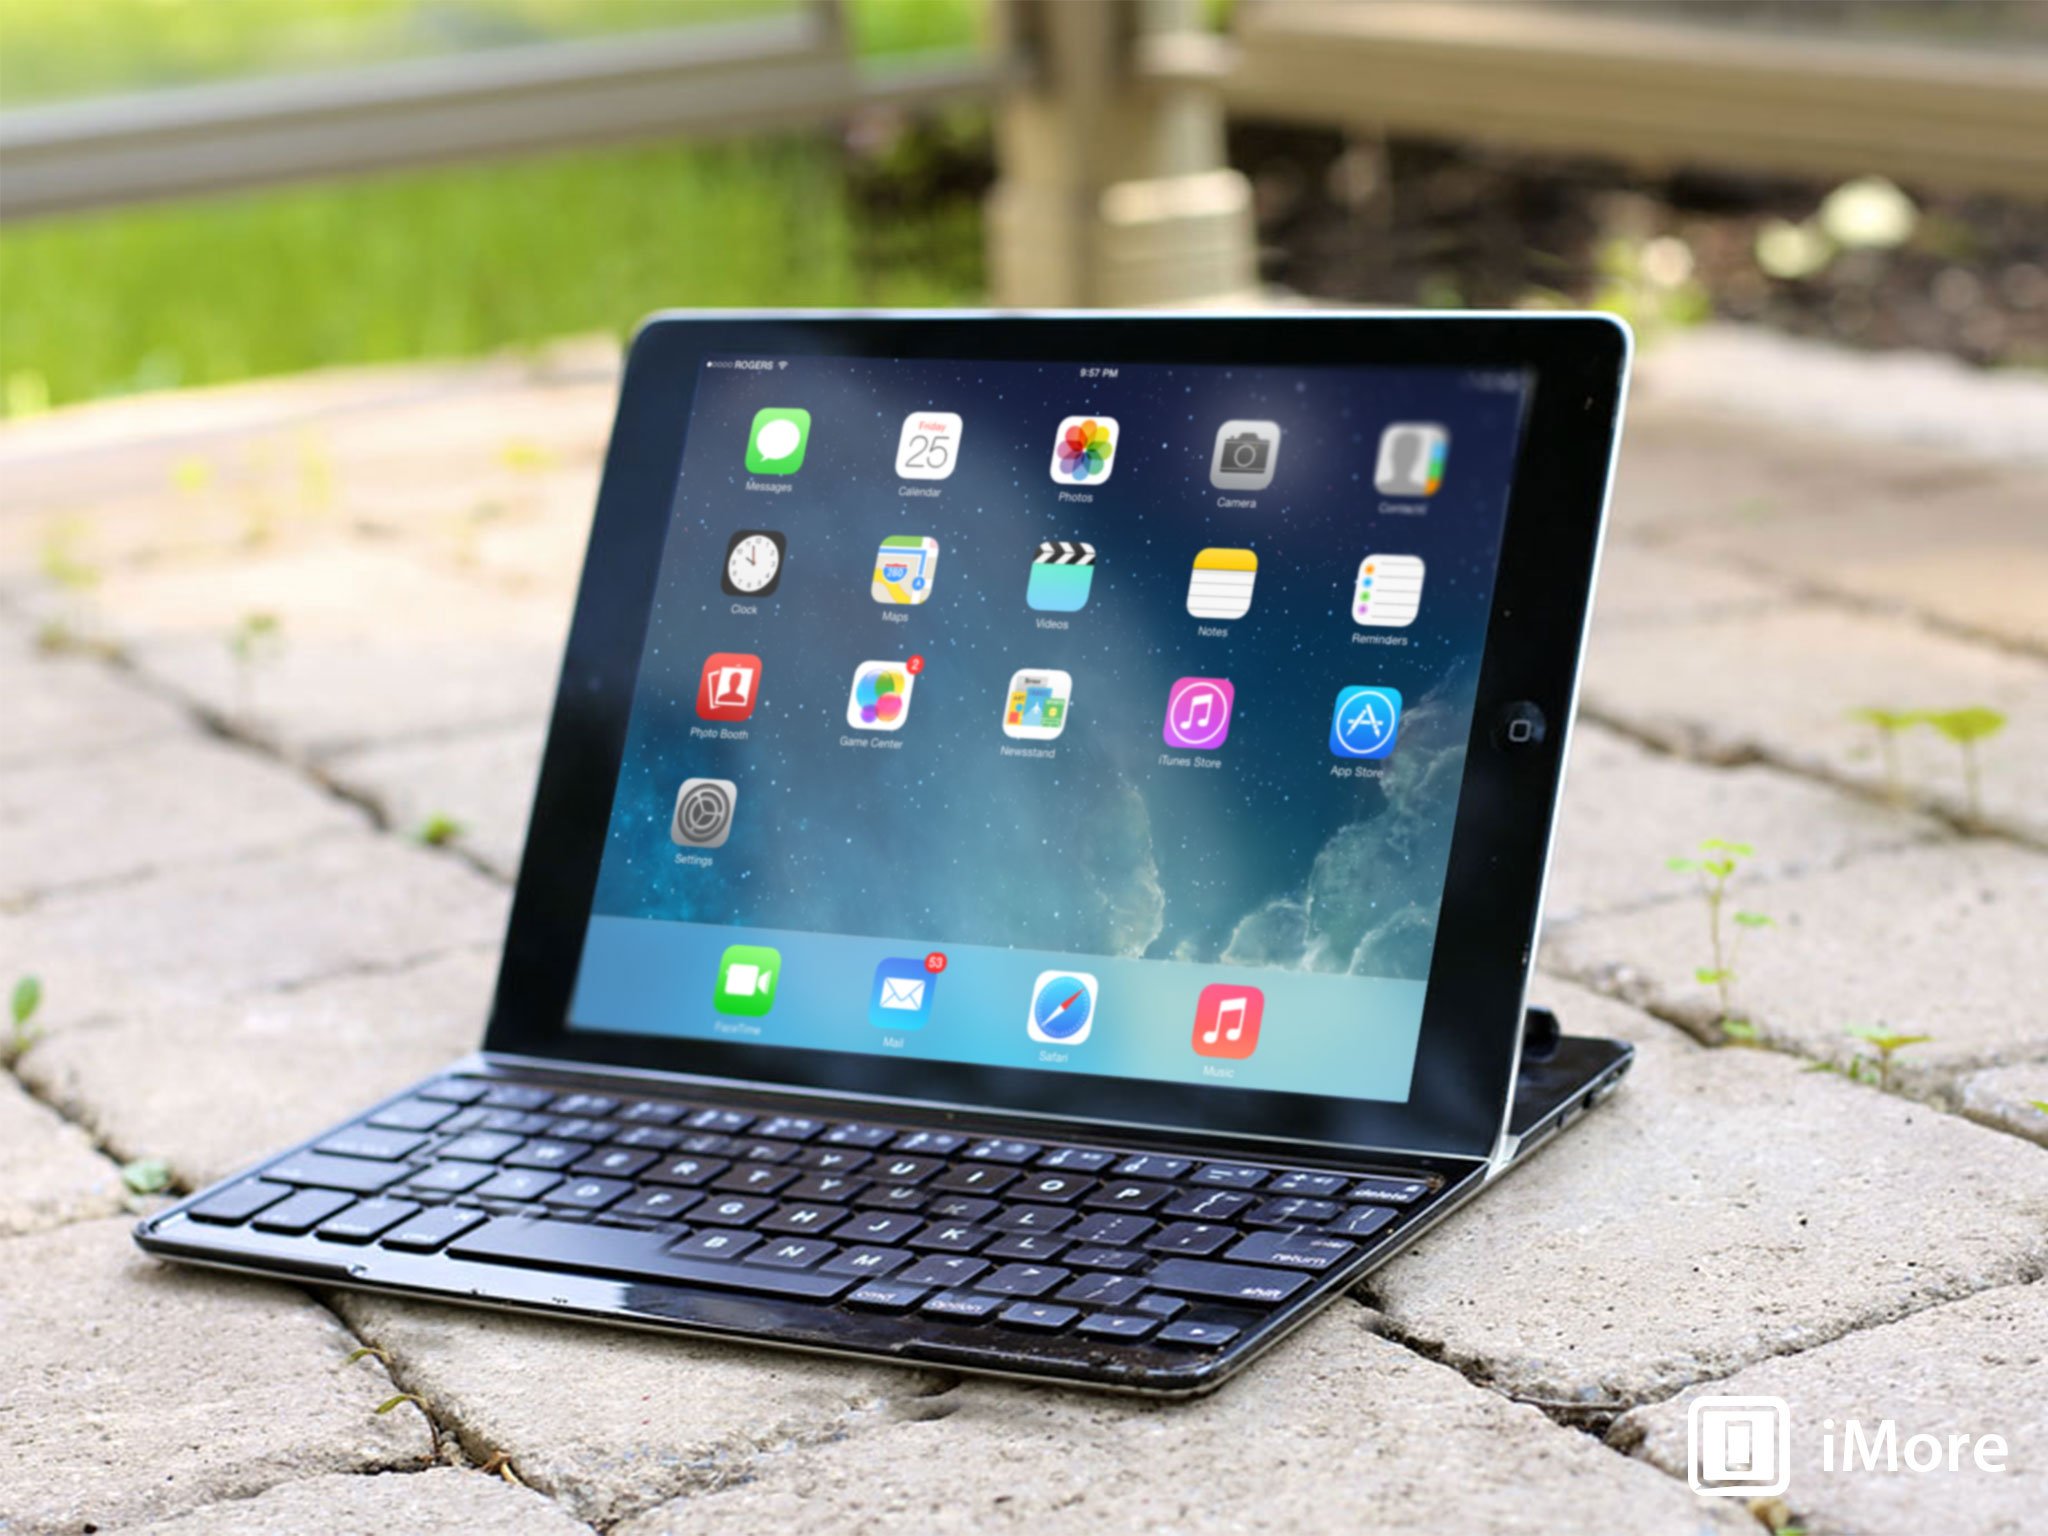 Using an external keyboard with your iPad? Here are the shortcuts you need to know!